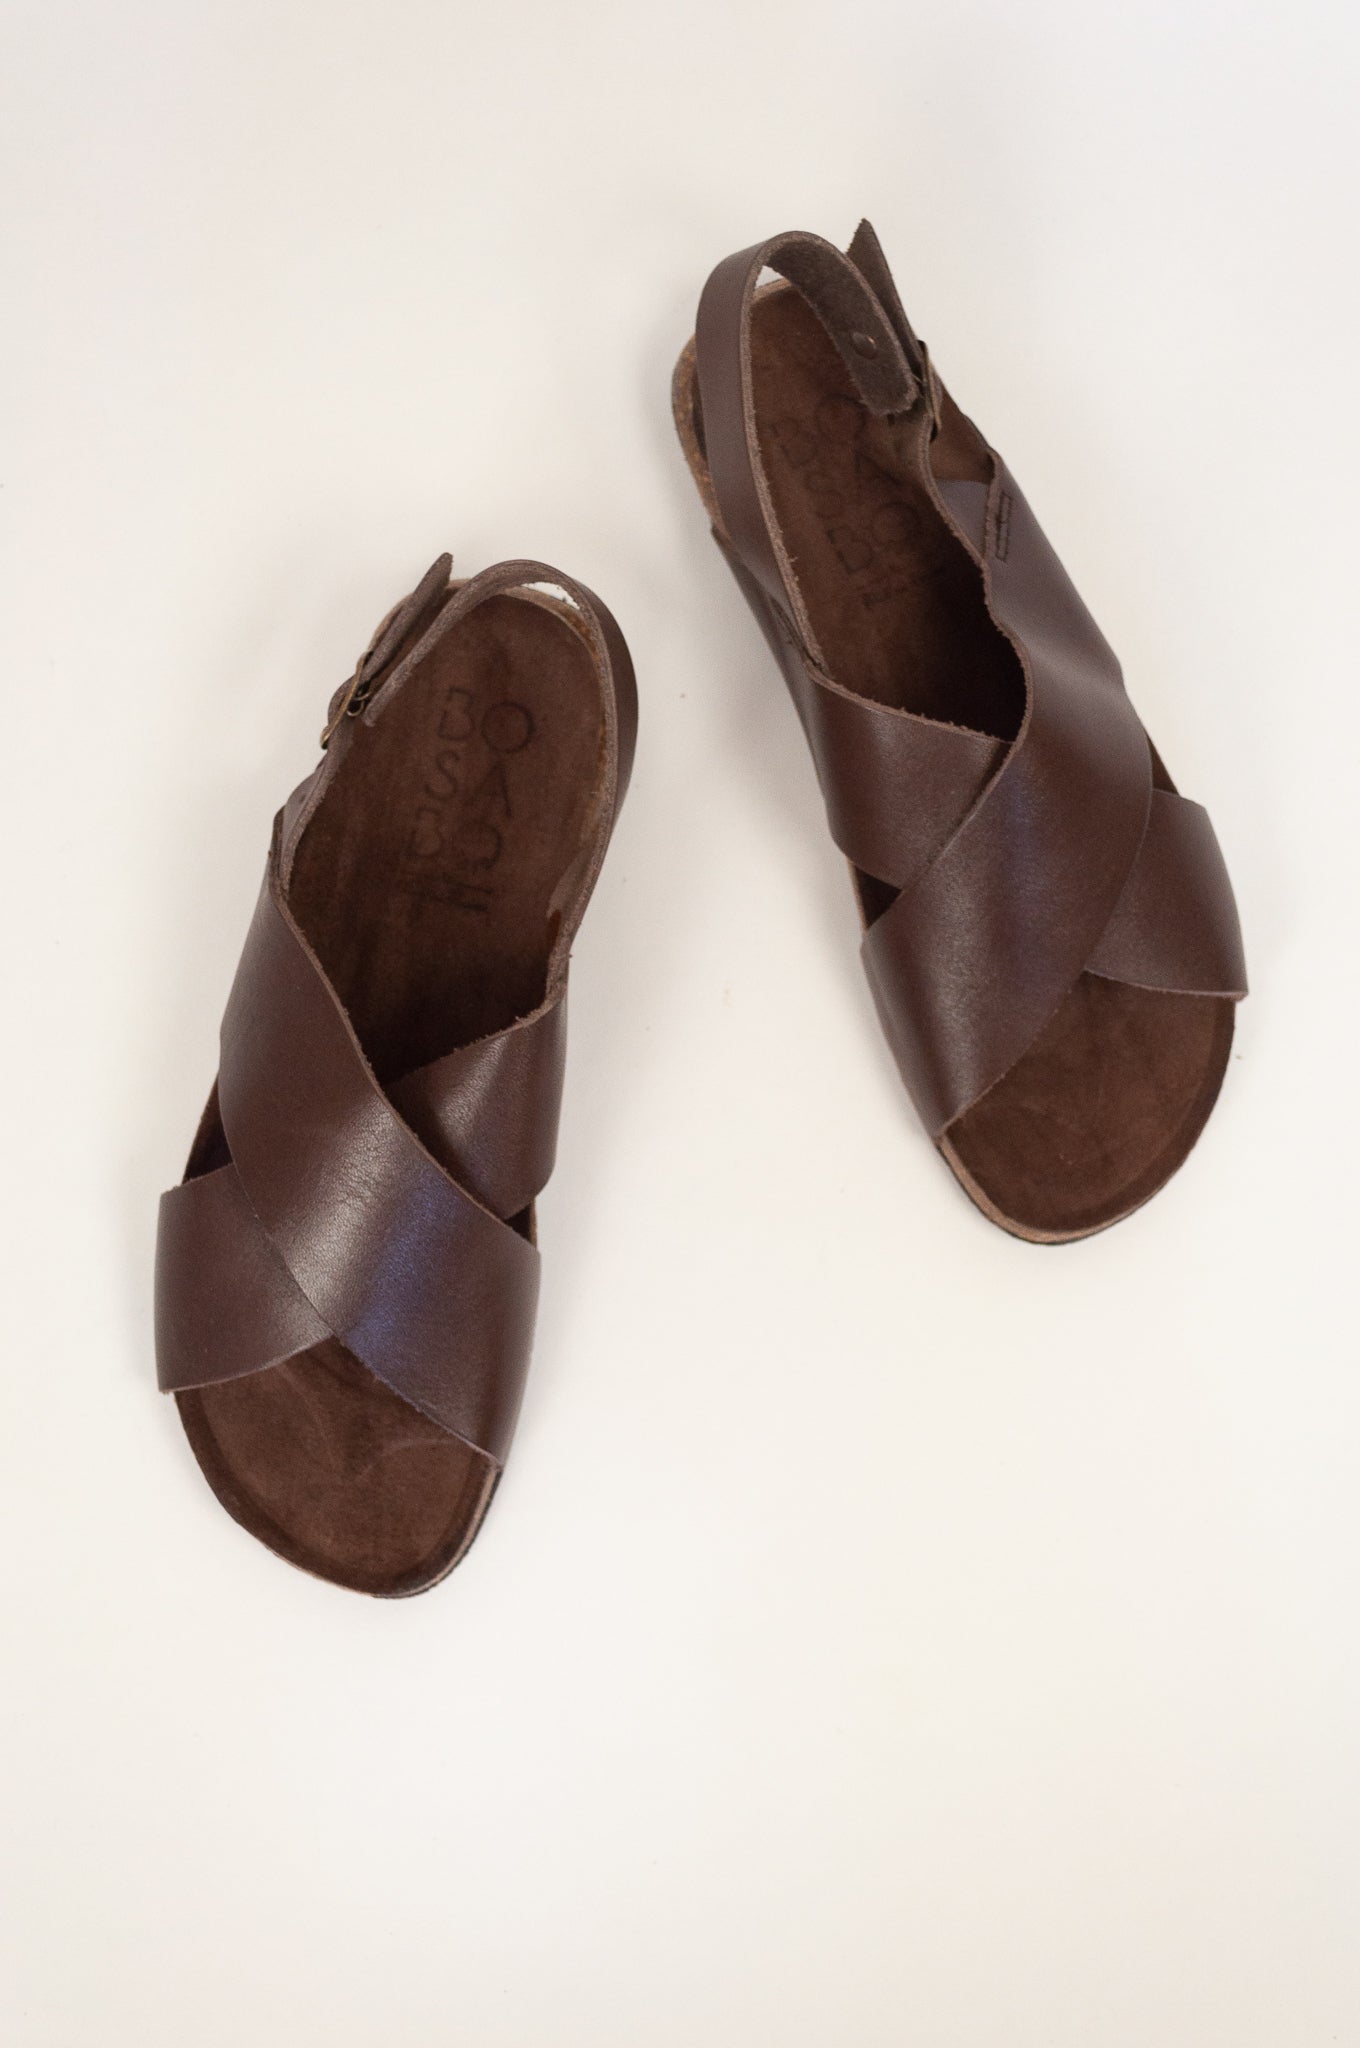 Bosabo handmade sandals vegetable tanned cross over with ankle strap in dark brown marone, natural cork sole. 